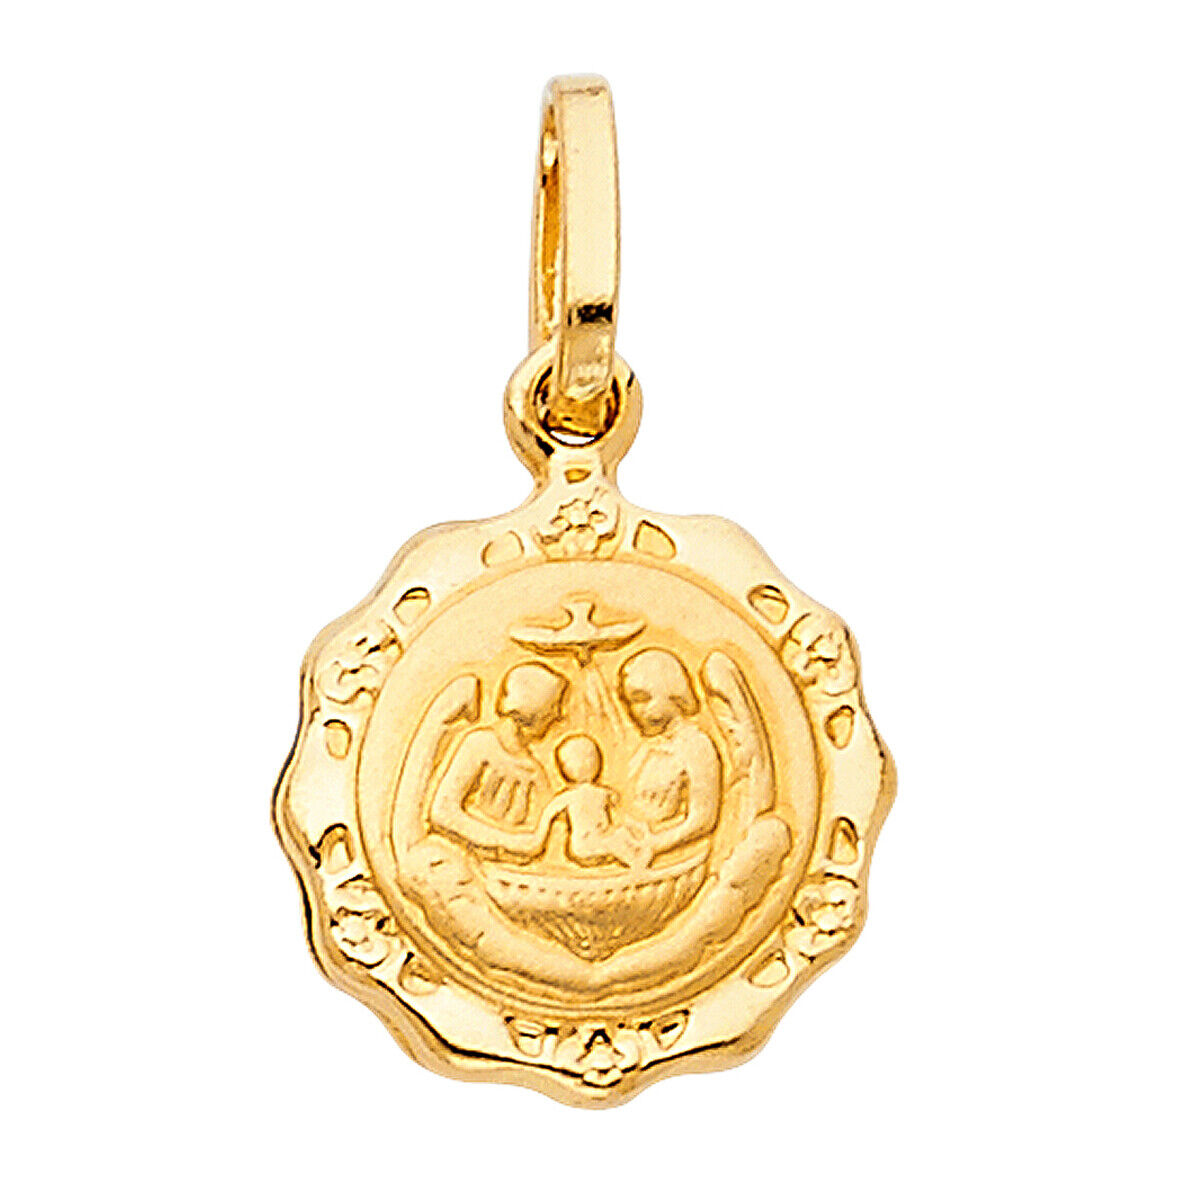 GOLD -14K Yellow Gold Baptism Religious Charm Pendant For Necklace or Chain